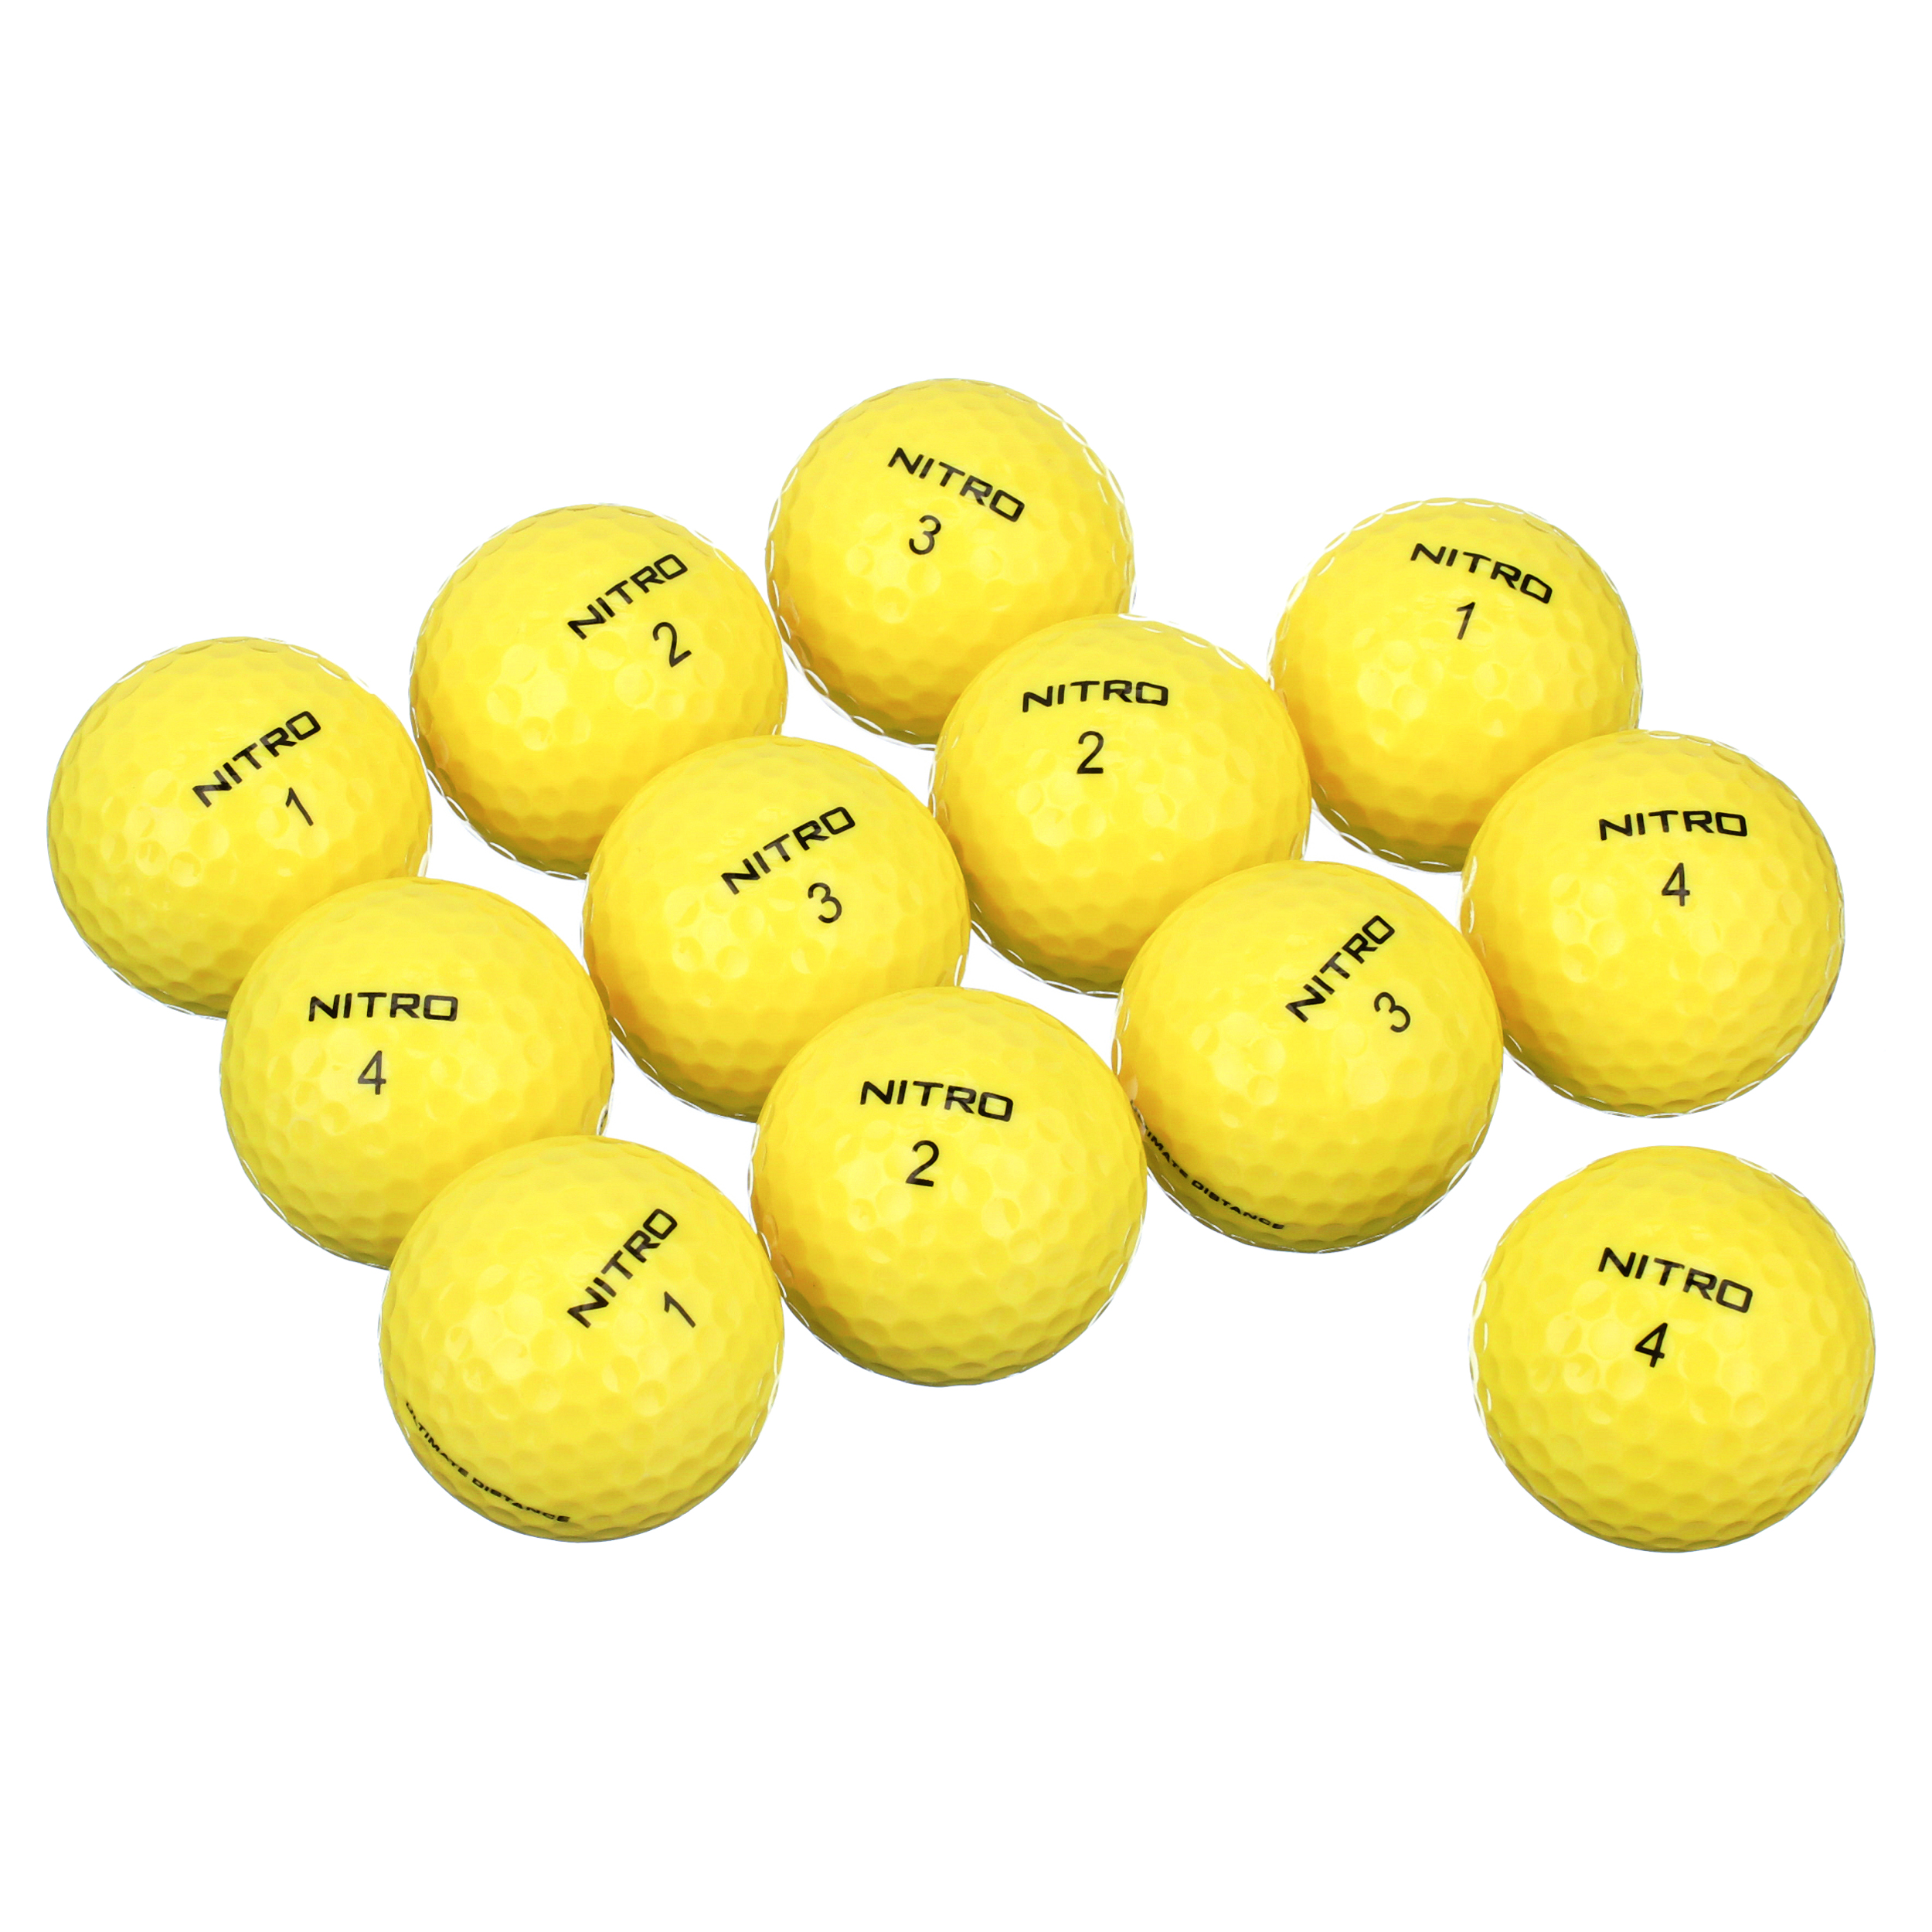 Nitro Golf Ultimate Distance Golf Balls, Yellow, 12 Pack - image 5 of 9